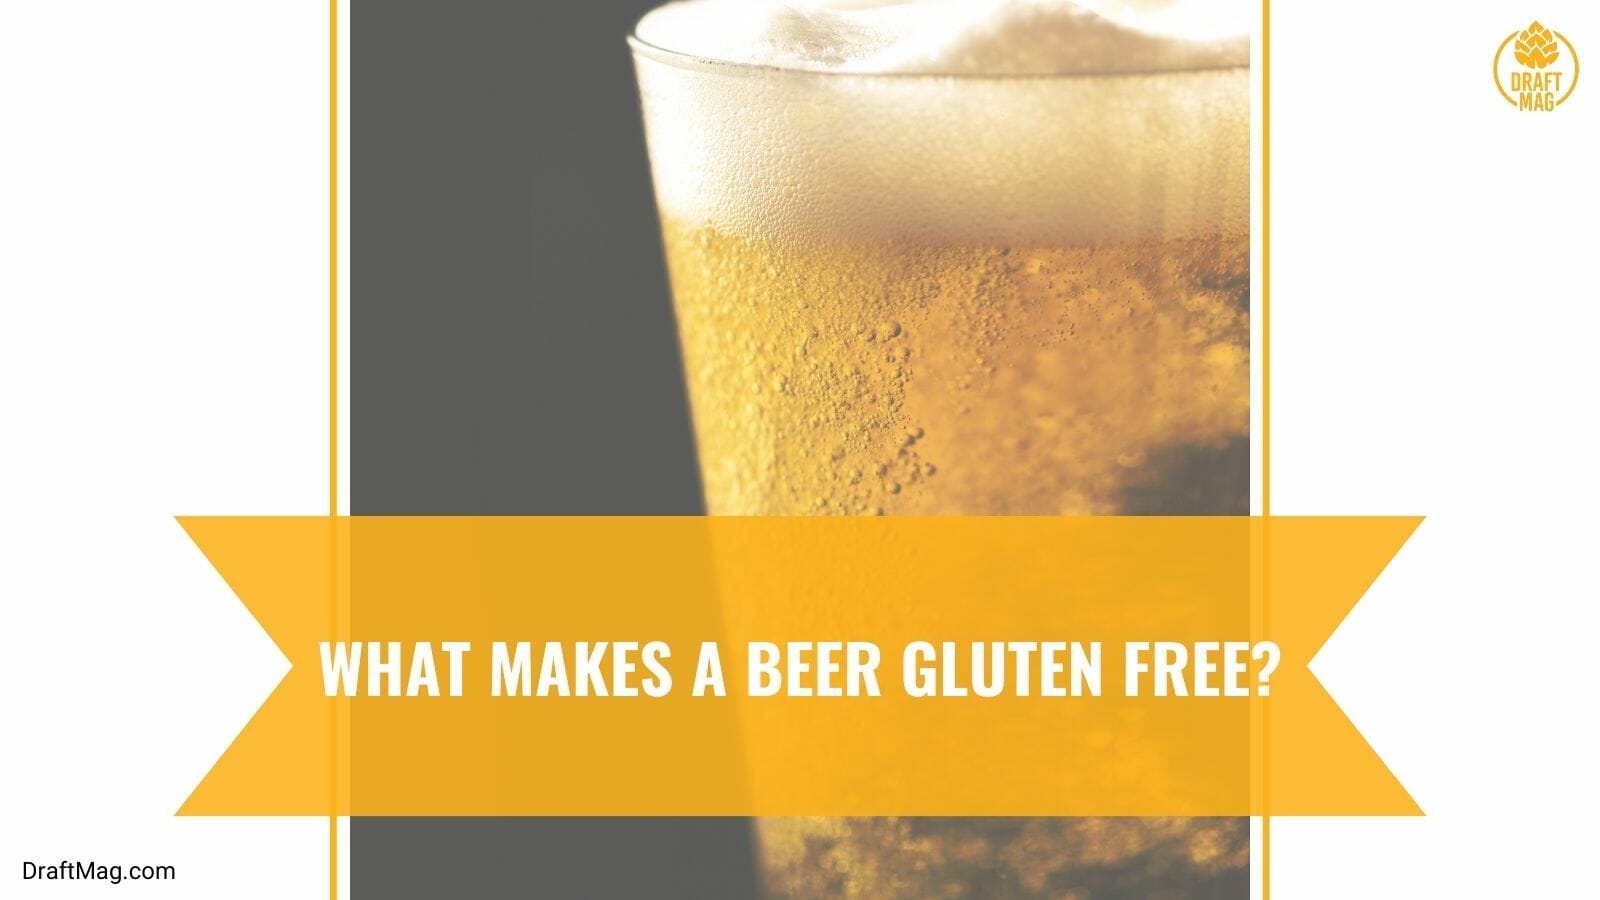 What Makes a Beer Gluten Free